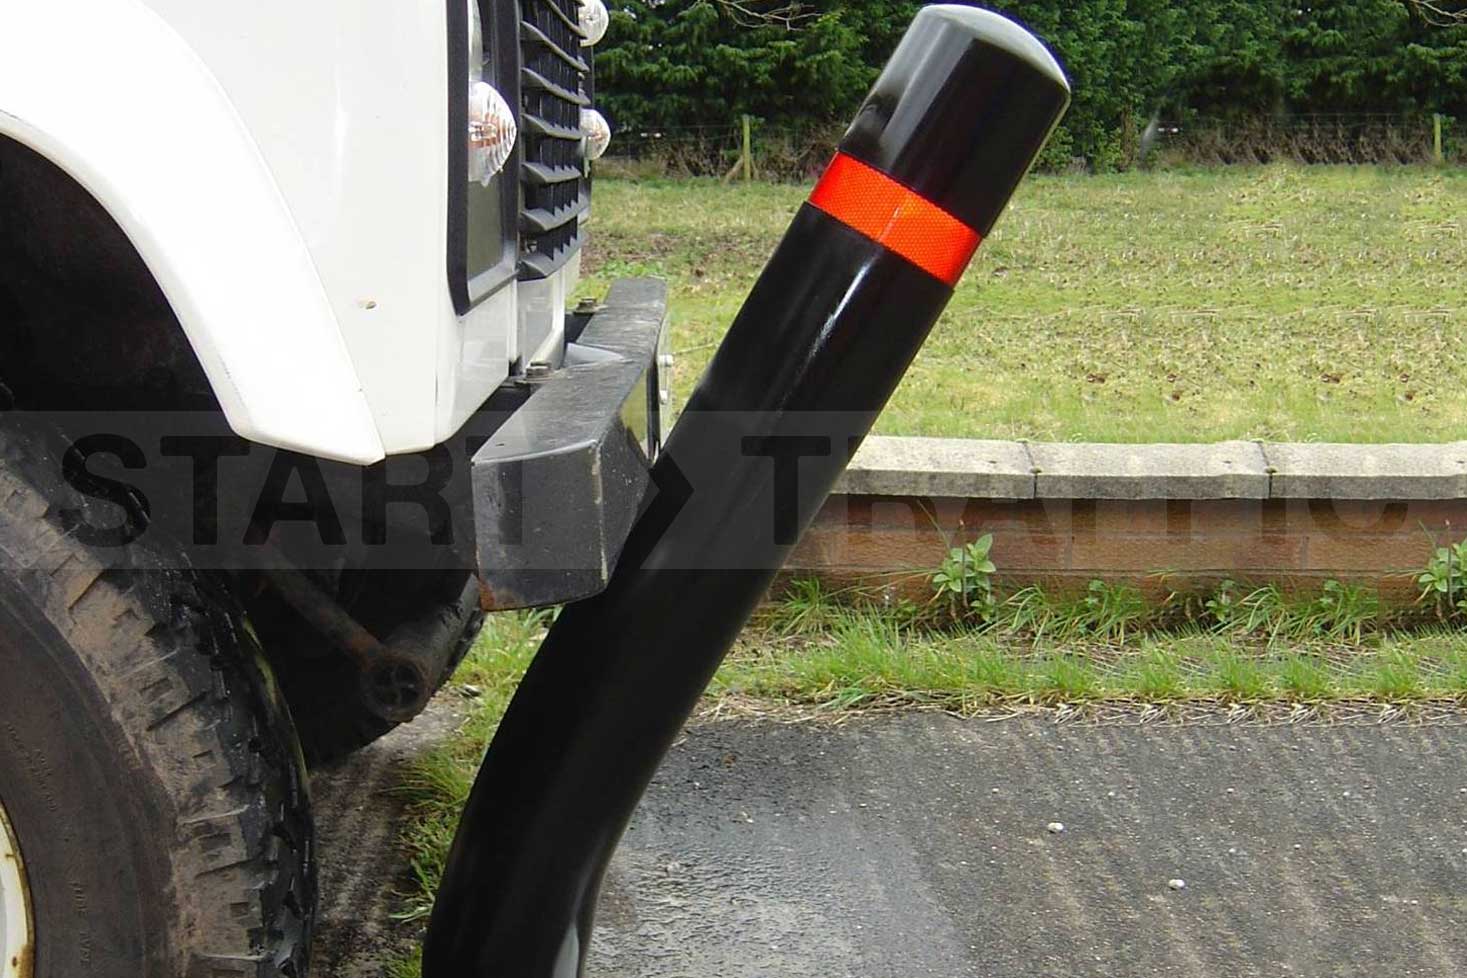 ImpactFlex Bollard Being Pushed over by Land Rover